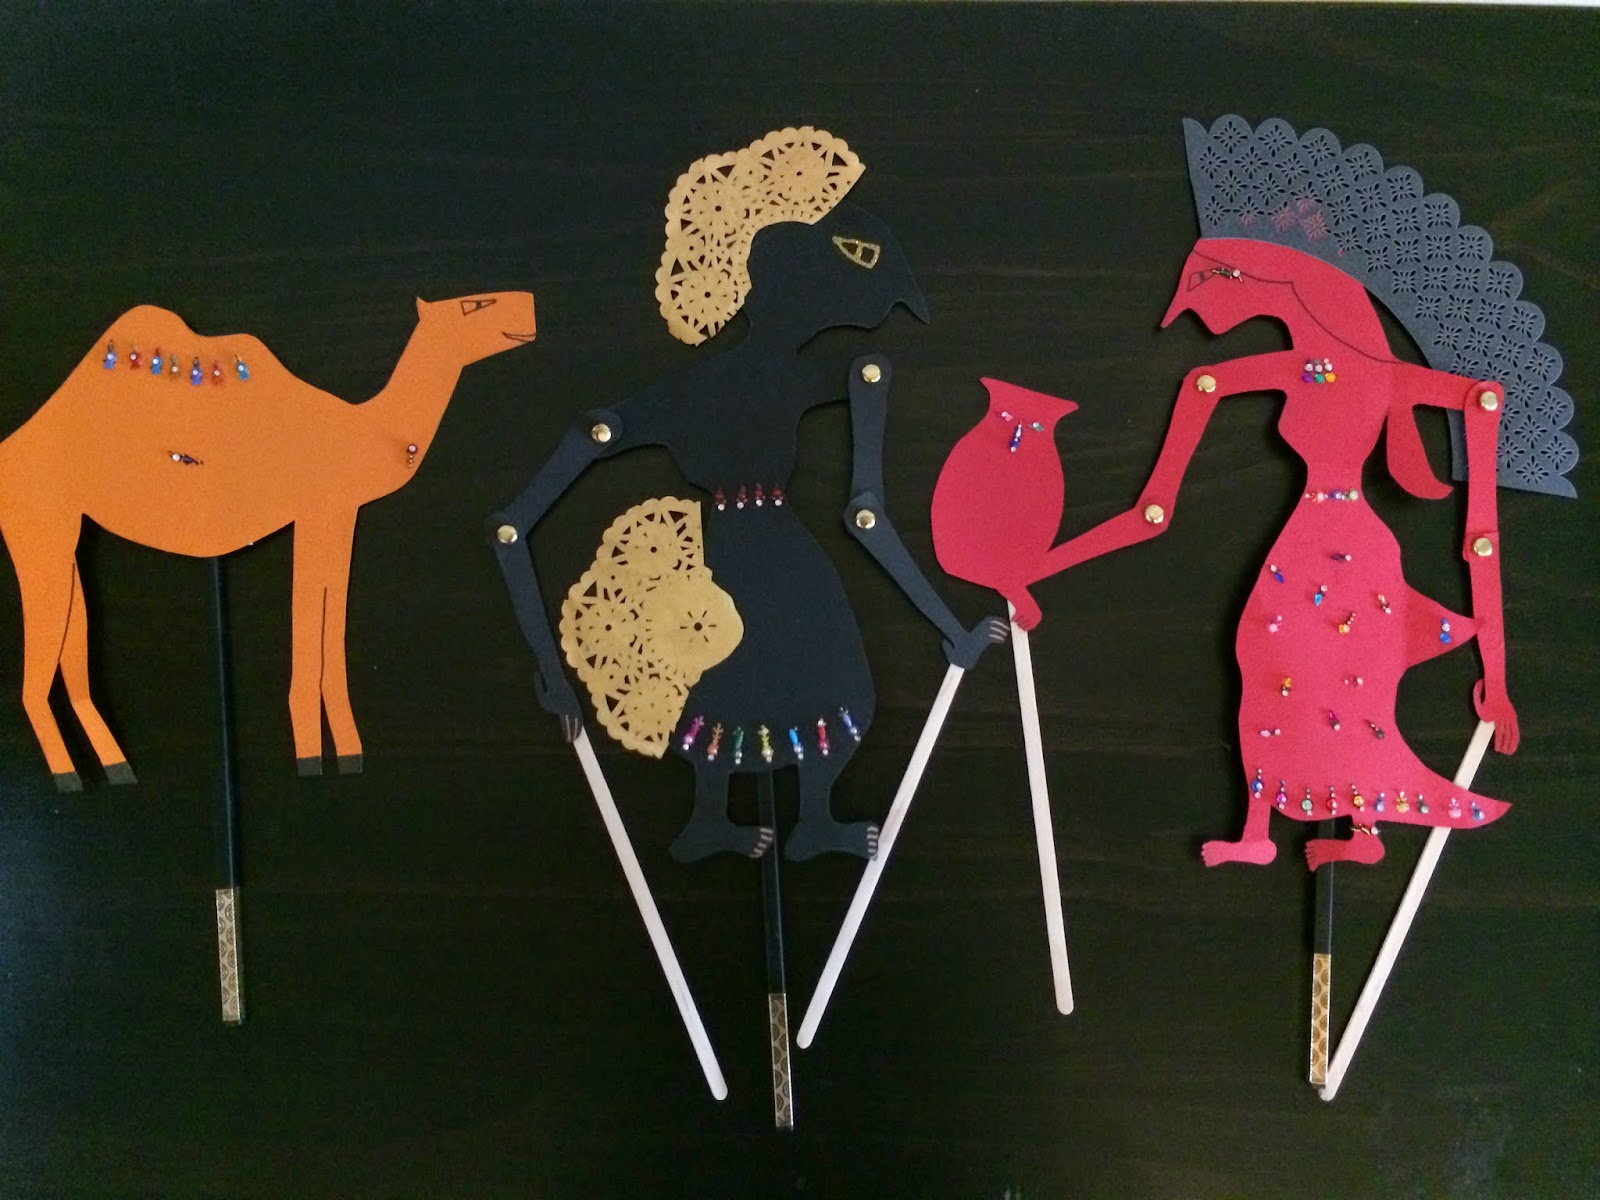 Wugs and Dooey: Using "Wayang" (Javanese-style Shadow Puppets) to